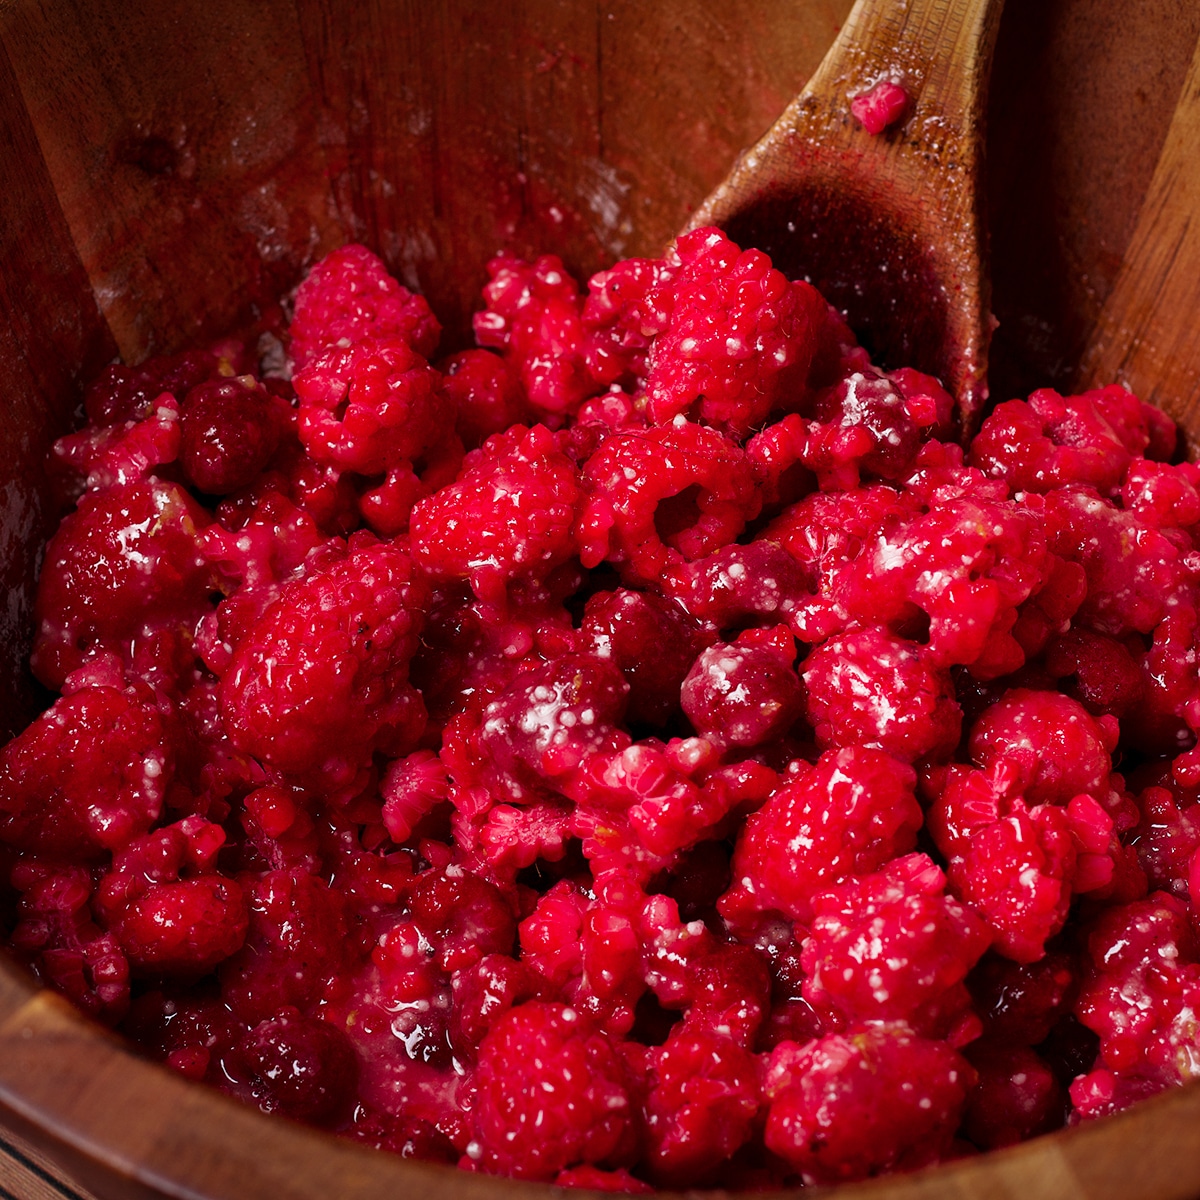 Using a wooden spoon to gently stir raspberries into the other ingredients for raspberry pie filling.